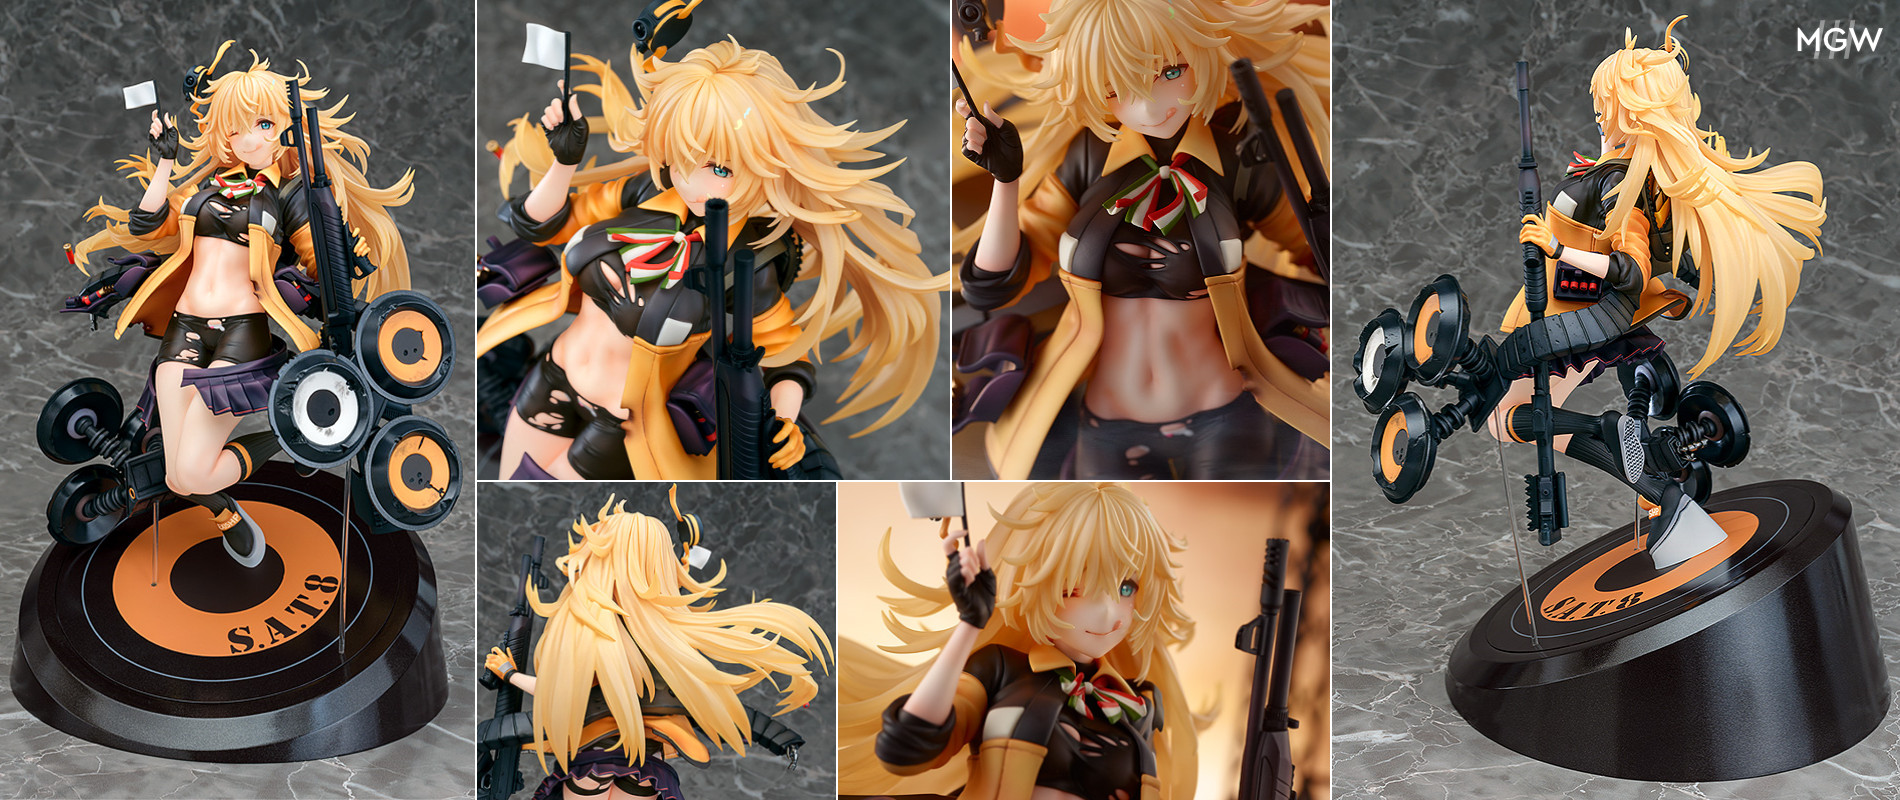 Girls Frontline S.A.T.8 Heavy Damage Ver. by Phat MyGrailWatch Anime Figure Guide